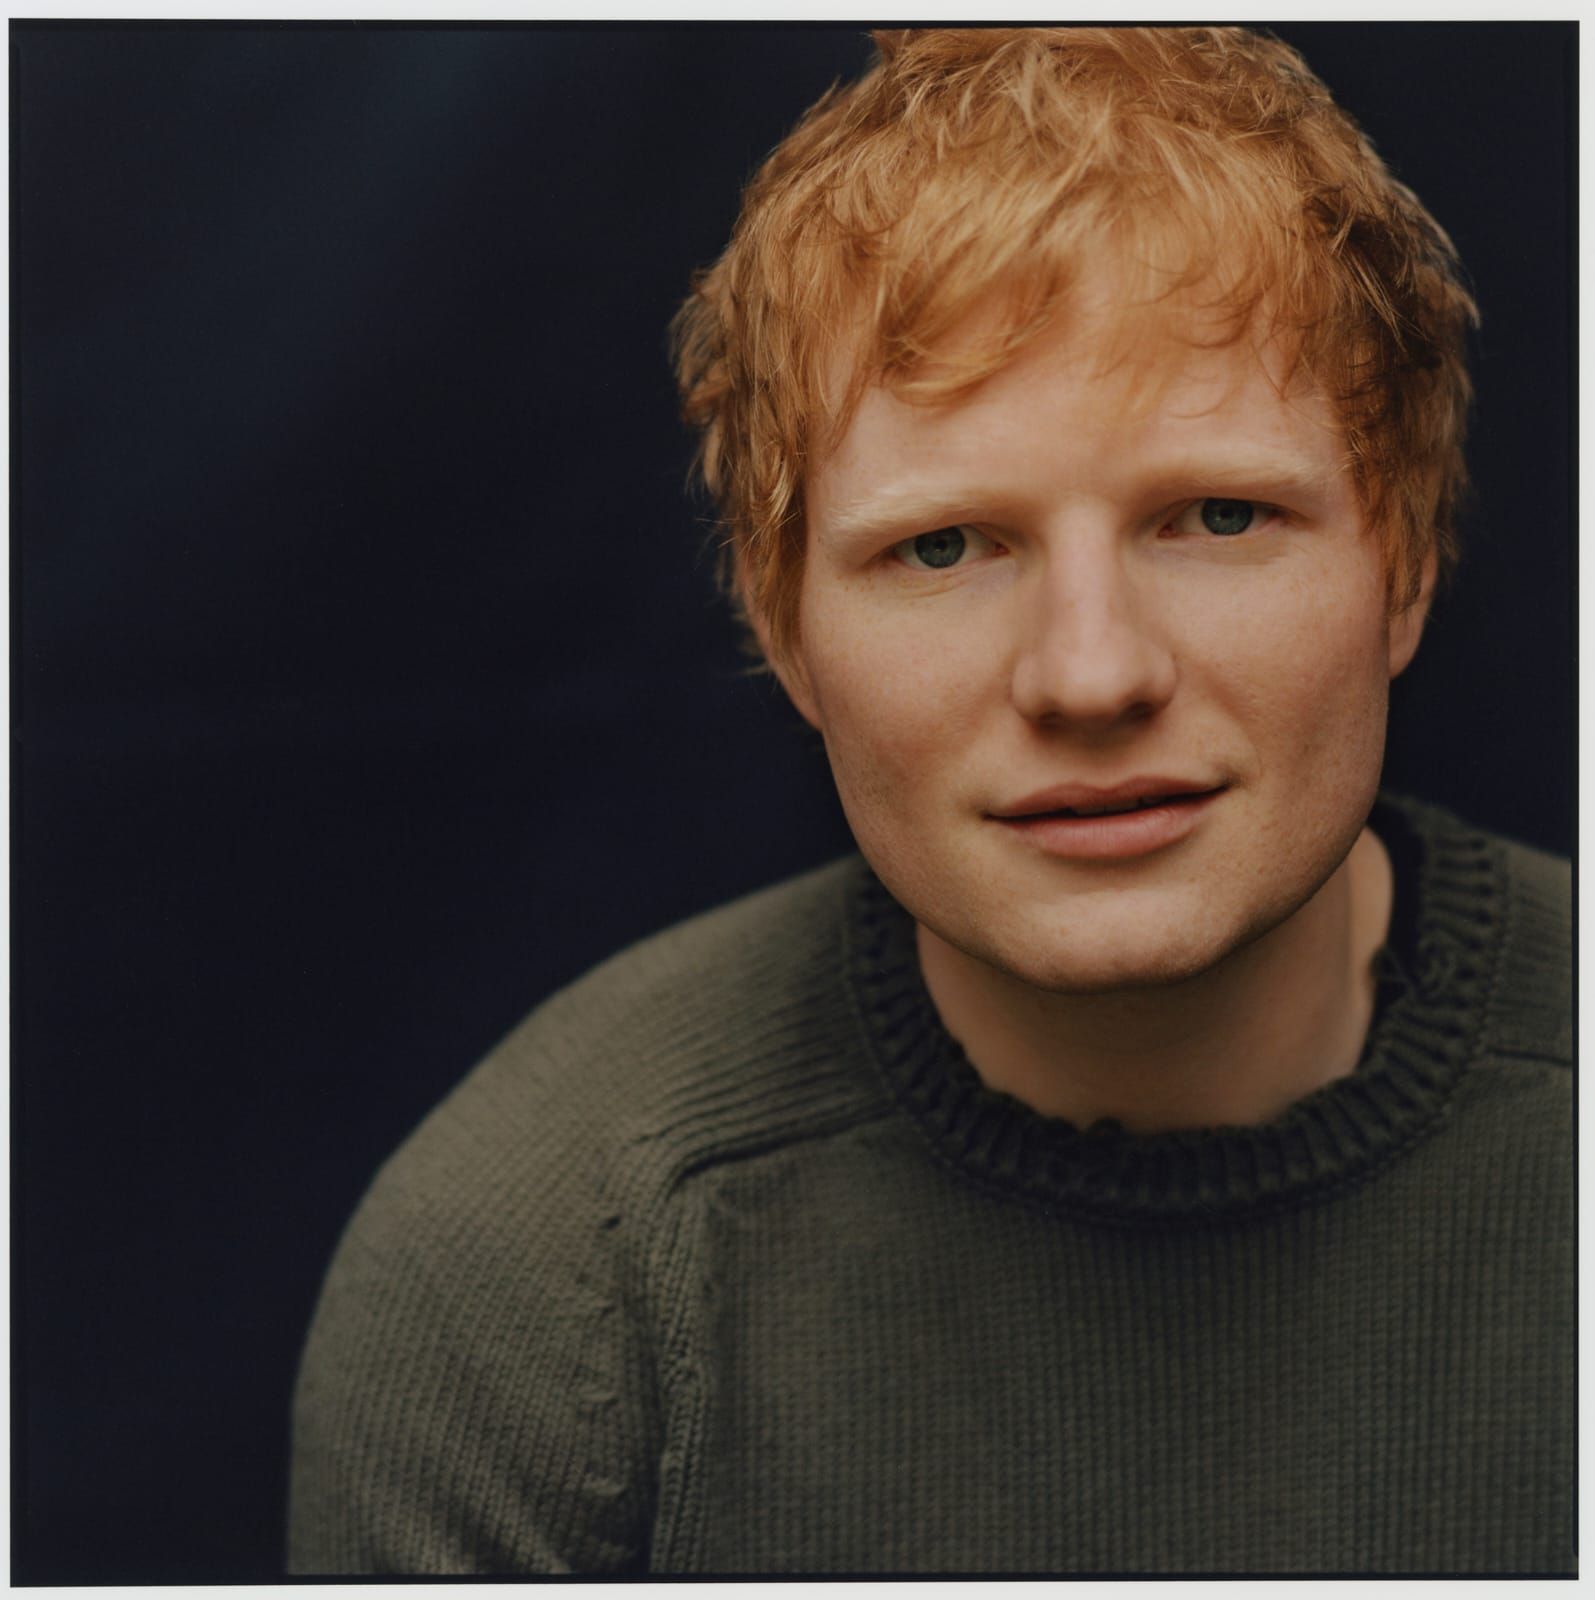 Find out who secured global icon Ed Sheeran to pledge support to India's Independence Day post-Covid relief fundraiser